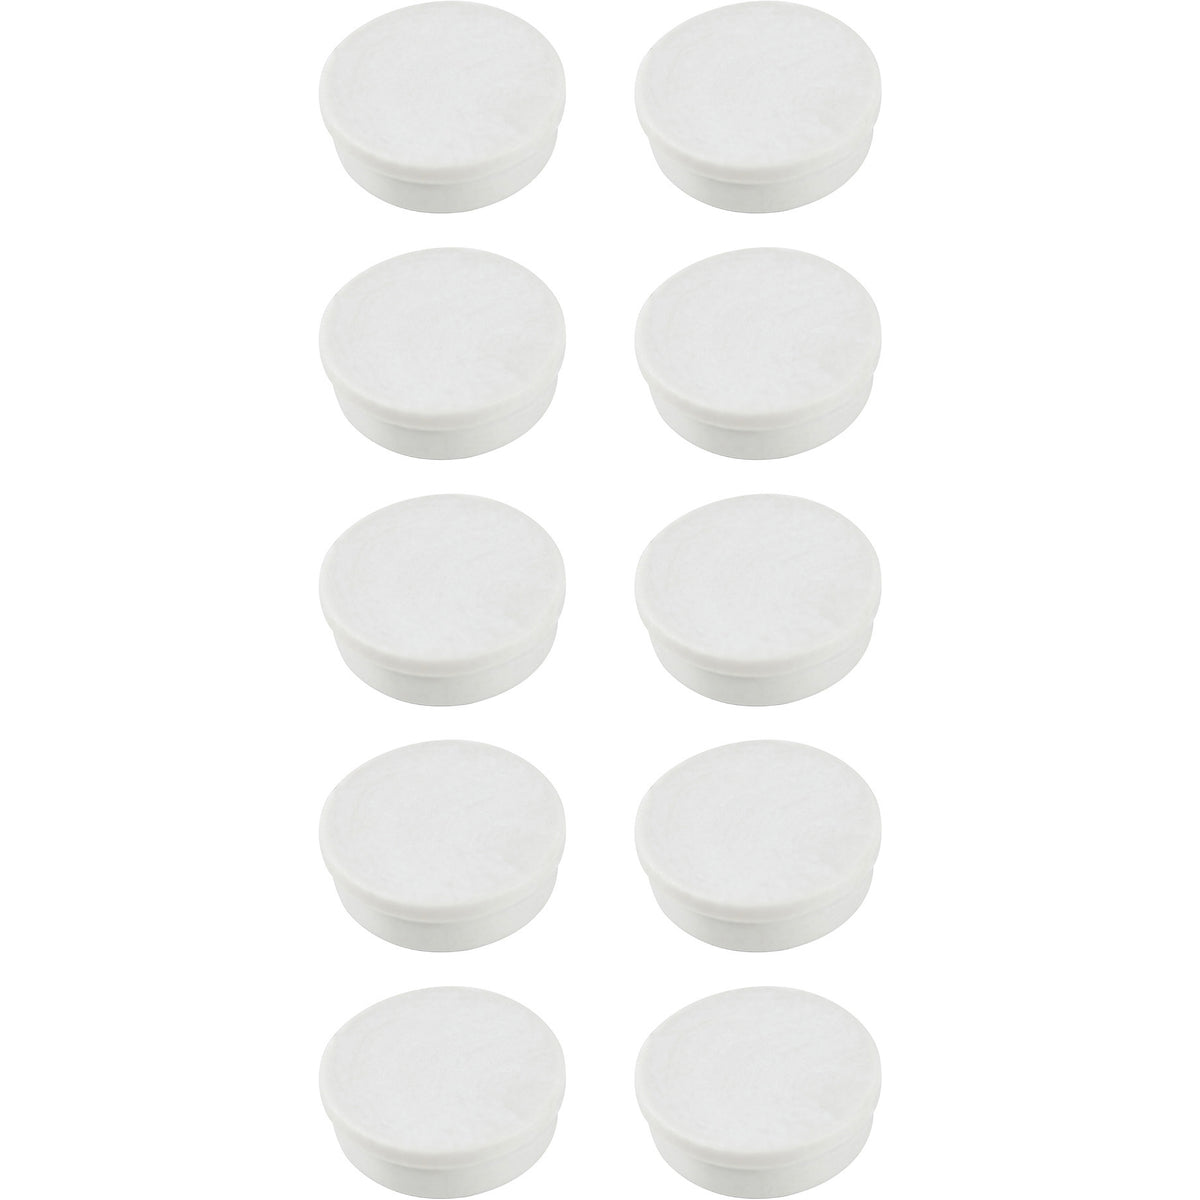 BIM141609 Antimicrobial Round Circle Magnet Pucks, 10 Pack, 1" Diameter, White, Great for Whiteboard, Fridge, Home, Office by MasterVision